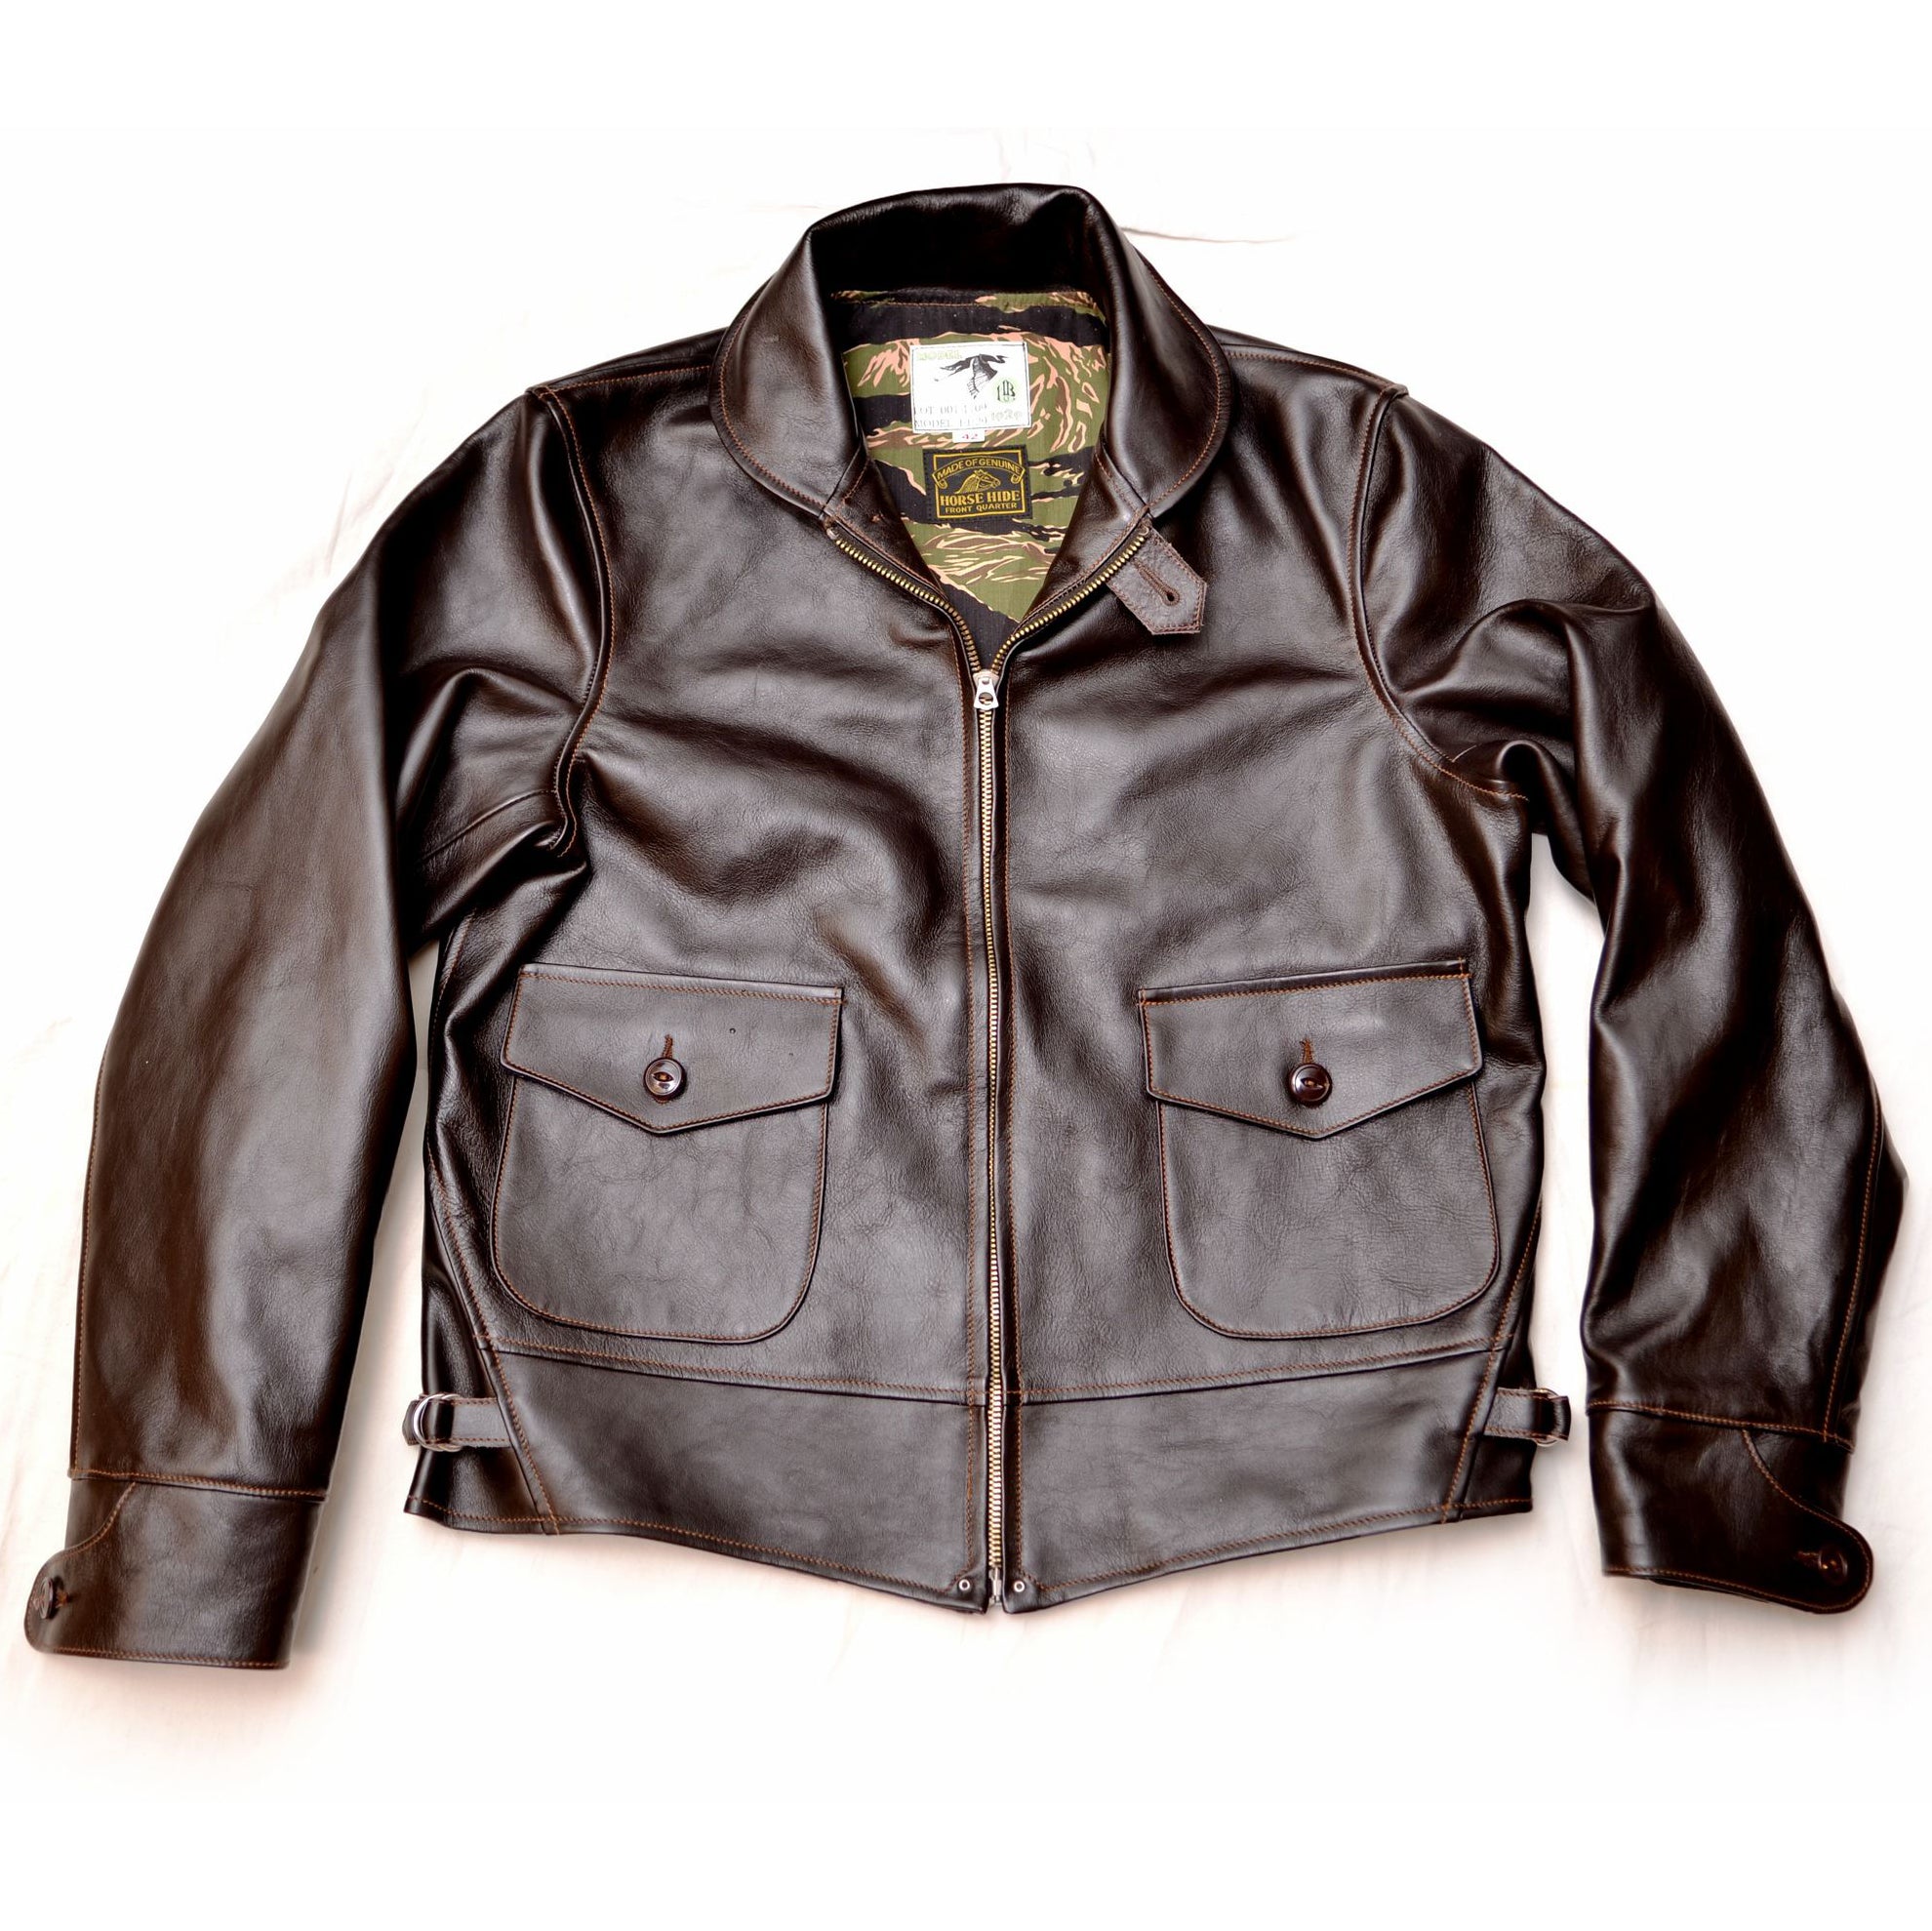 The Himel Heron—The Absolute Best A-1 Jacket Himel Leather | lupon.gov.ph